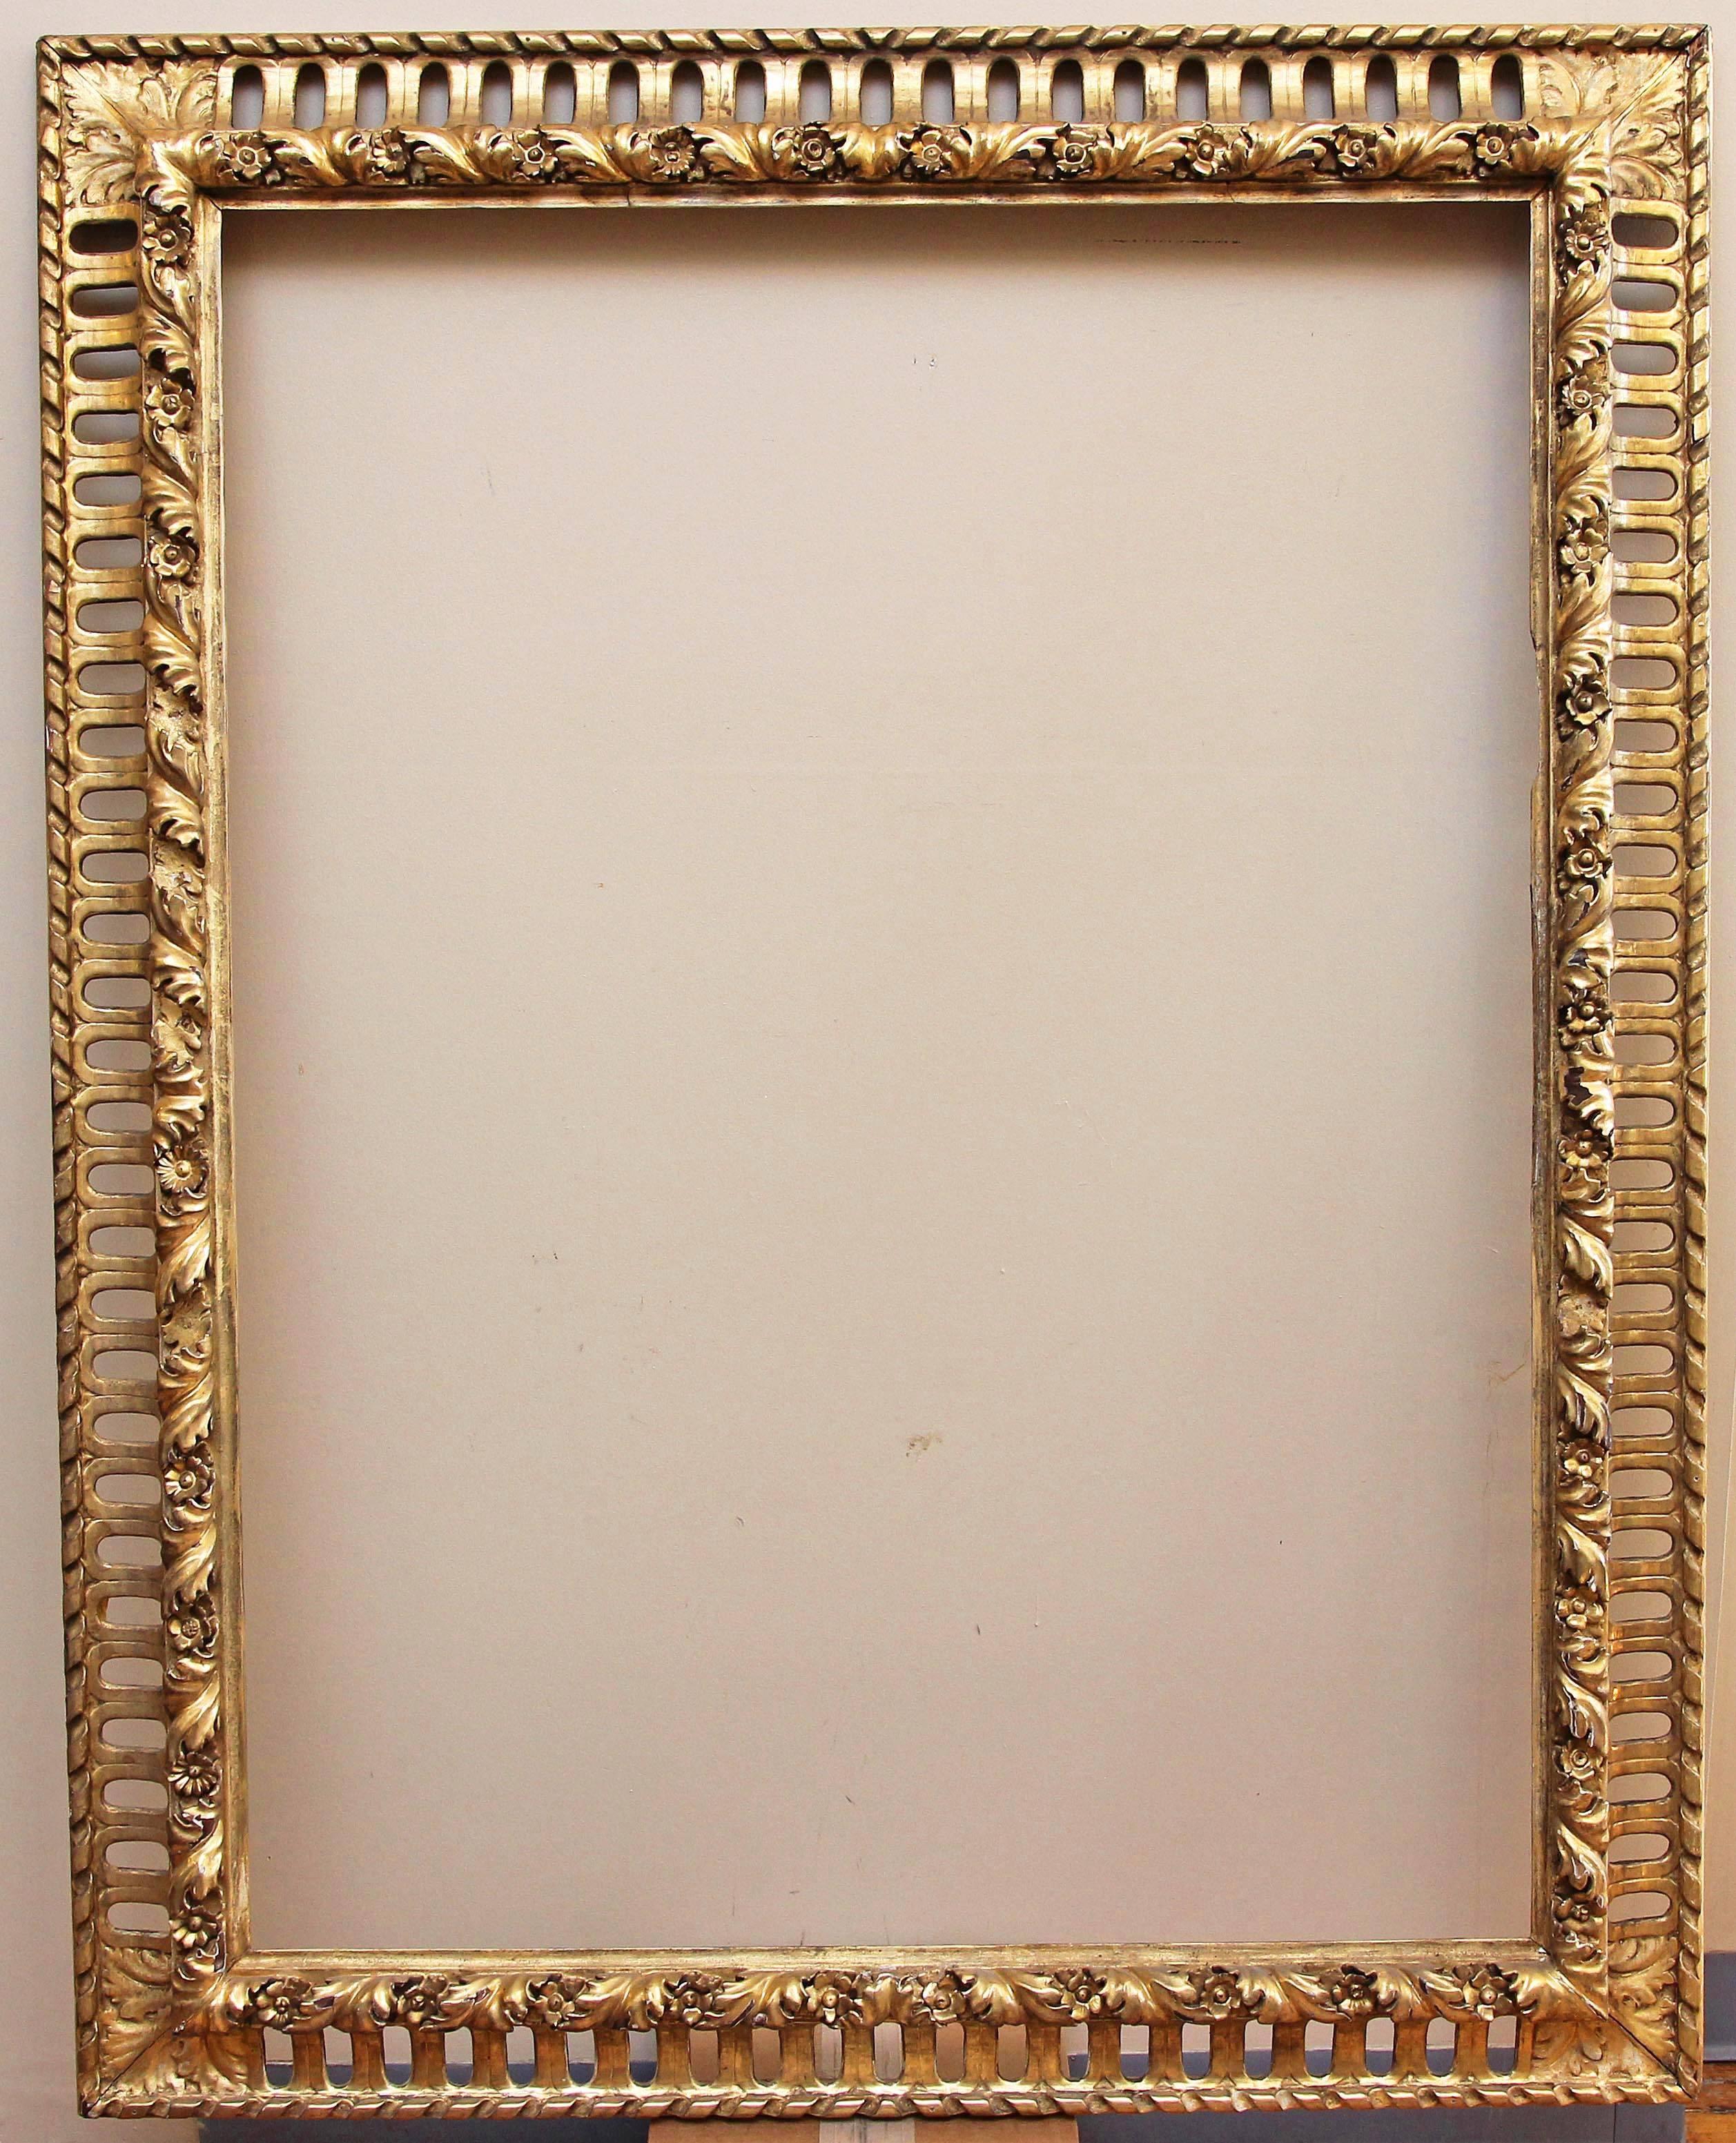 Large Italian Baroque style frame. Carved wood and original gold leaf gilding. 19th century. Opening measures: 51